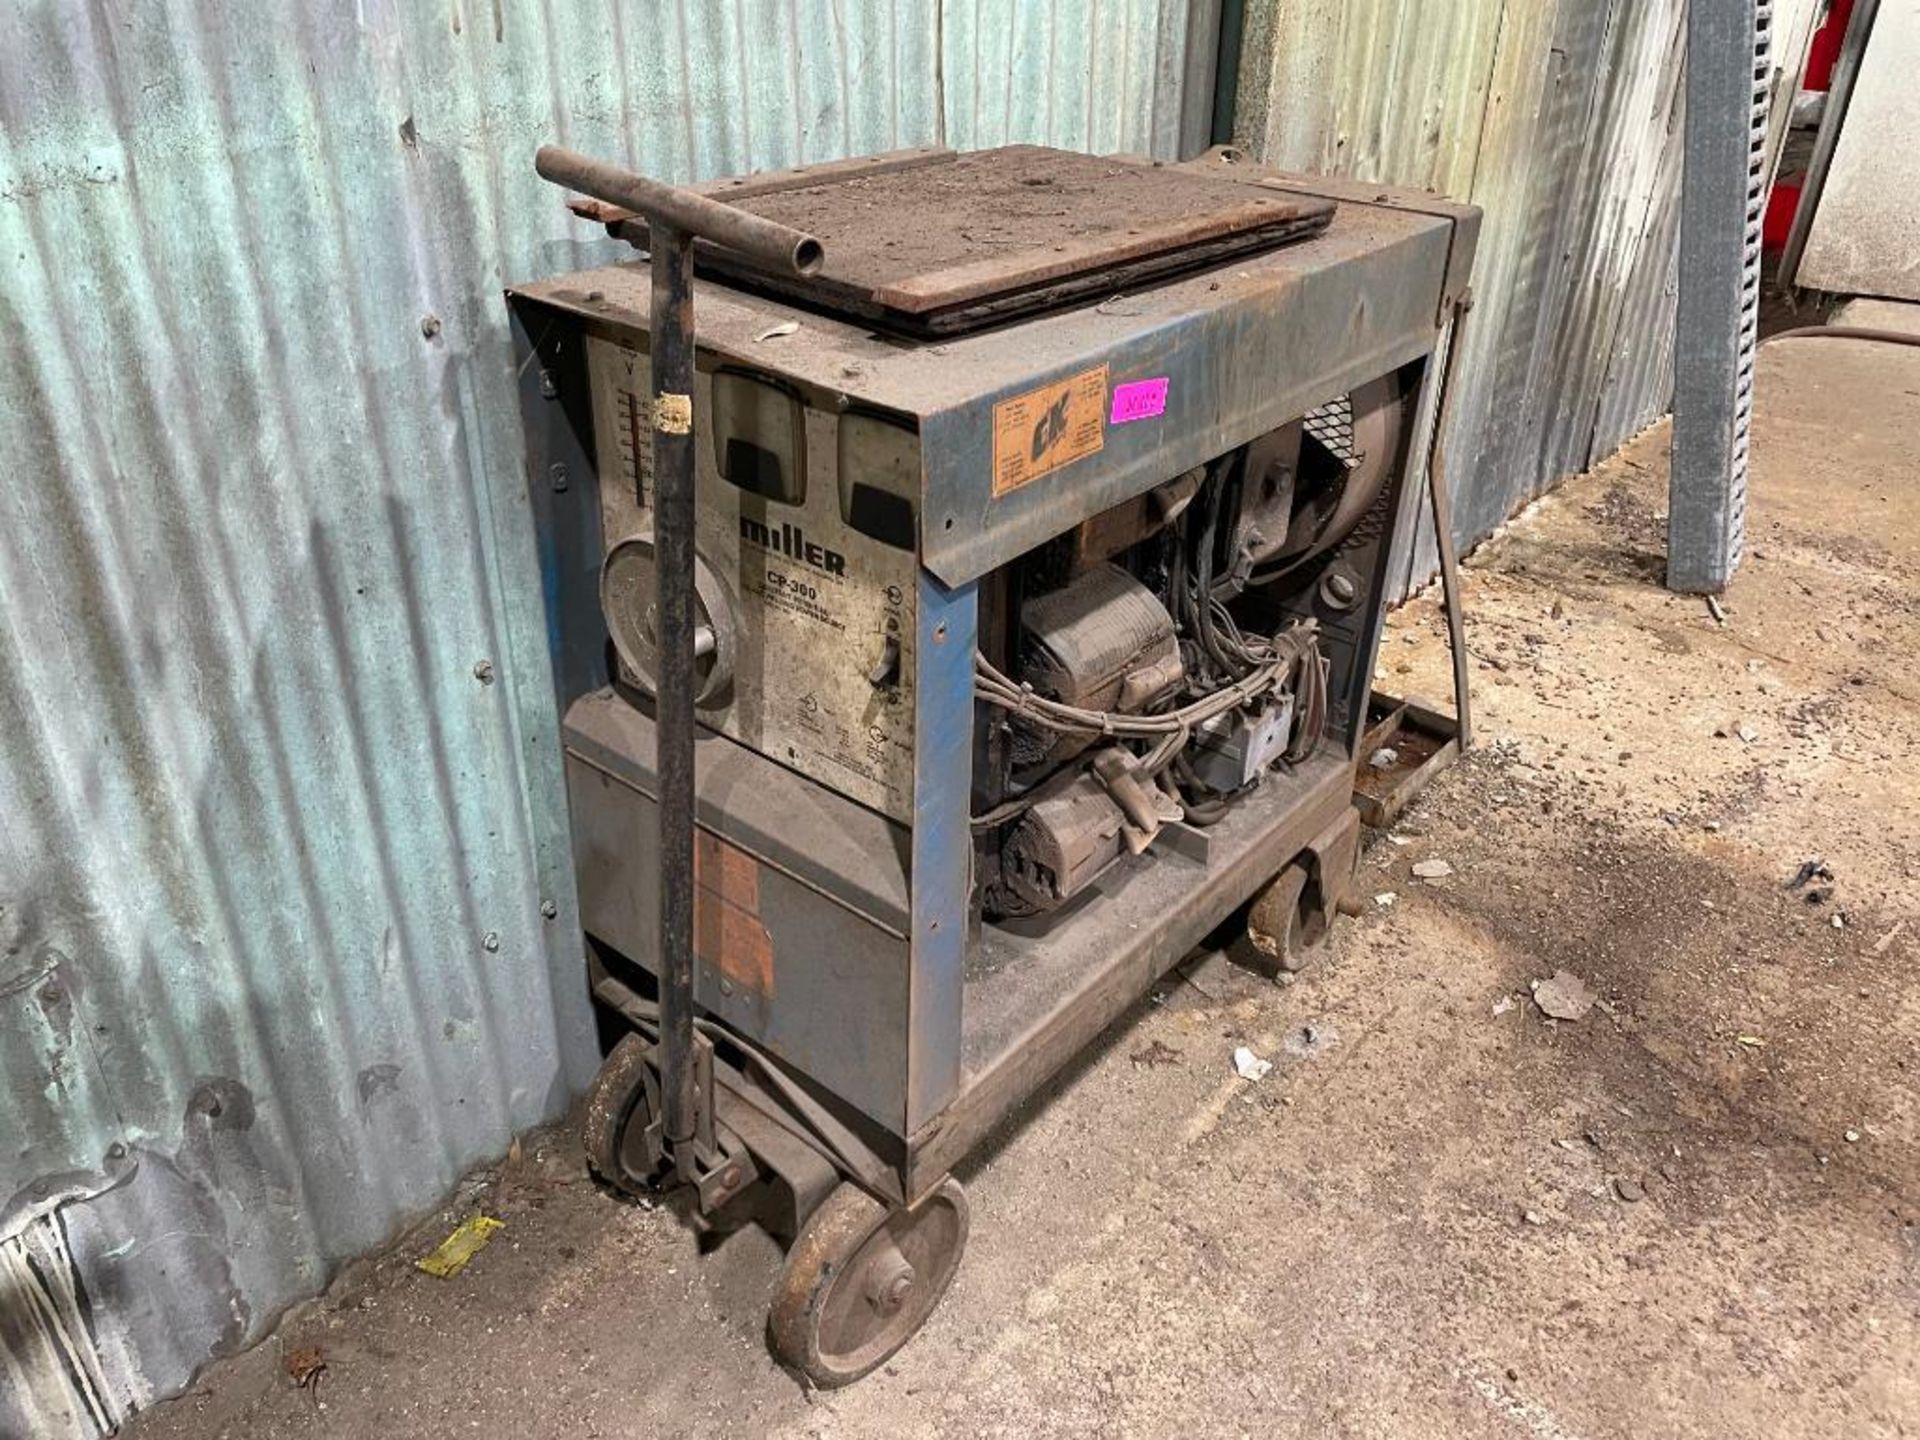 DESCRIPTION MILLER CP-300 DC ARC WELDING POWER SOURCE WELDER (NOT IN WORKING CONDITION, FOR PARTS) B - Image 3 of 5